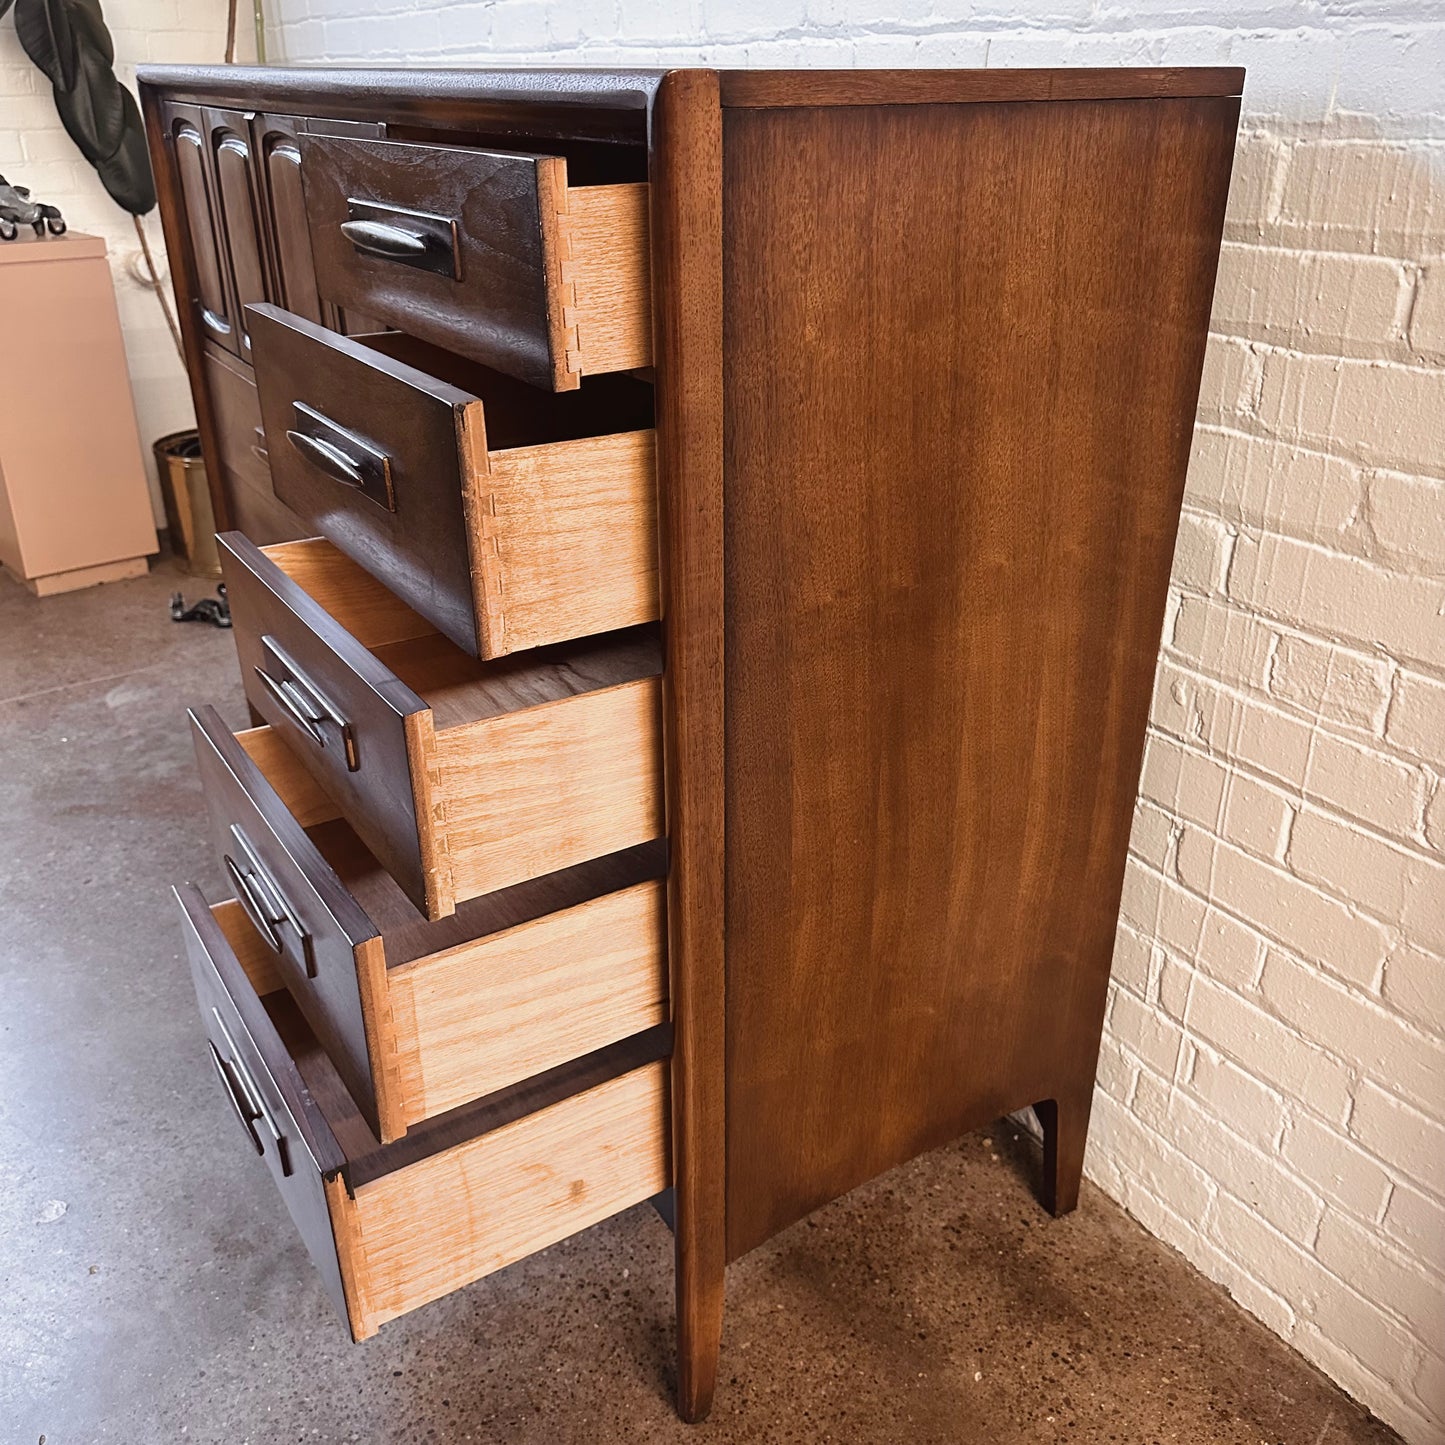 BROYHILL EMPHASIS GENTLEMEN’S CHEST OF DRAWERS